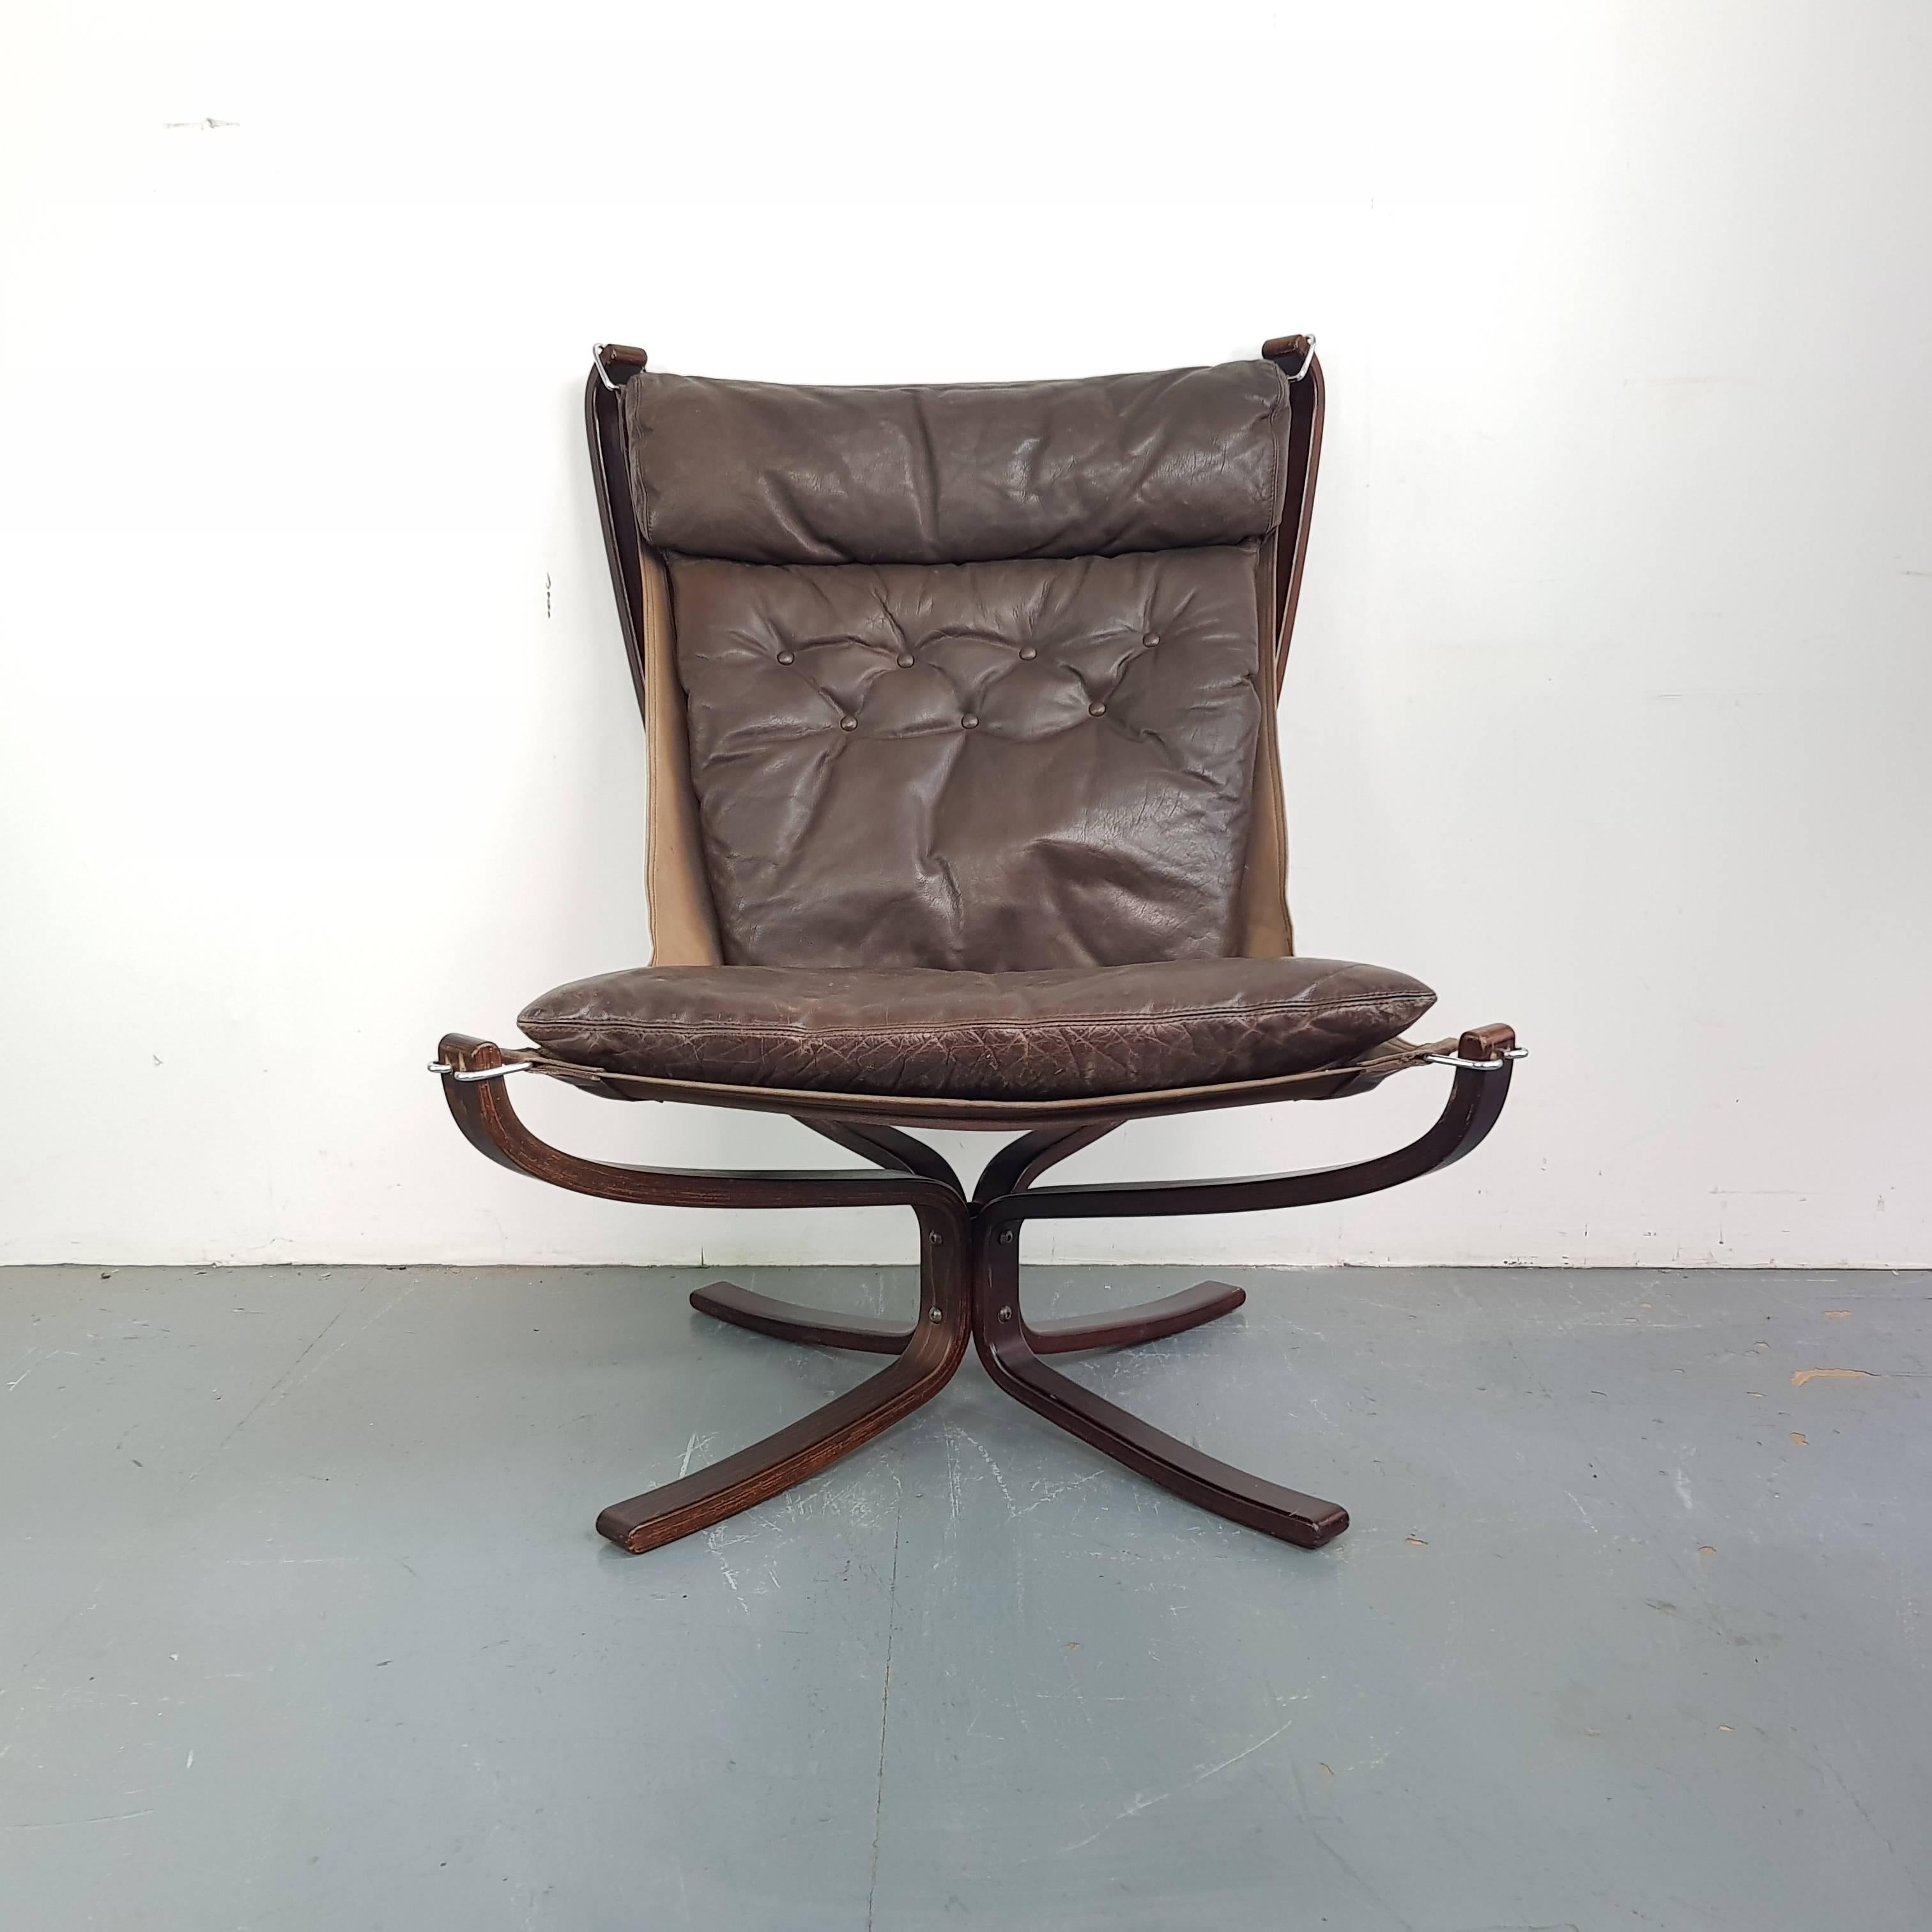 Lovely vintage high back brown leather Falcon chair designed by Sigurd Resell.

In good vintage condition. There is some age-related wear, as expected, but nothing really noticeable. The leather is in good condition with no rips or tears. 

The